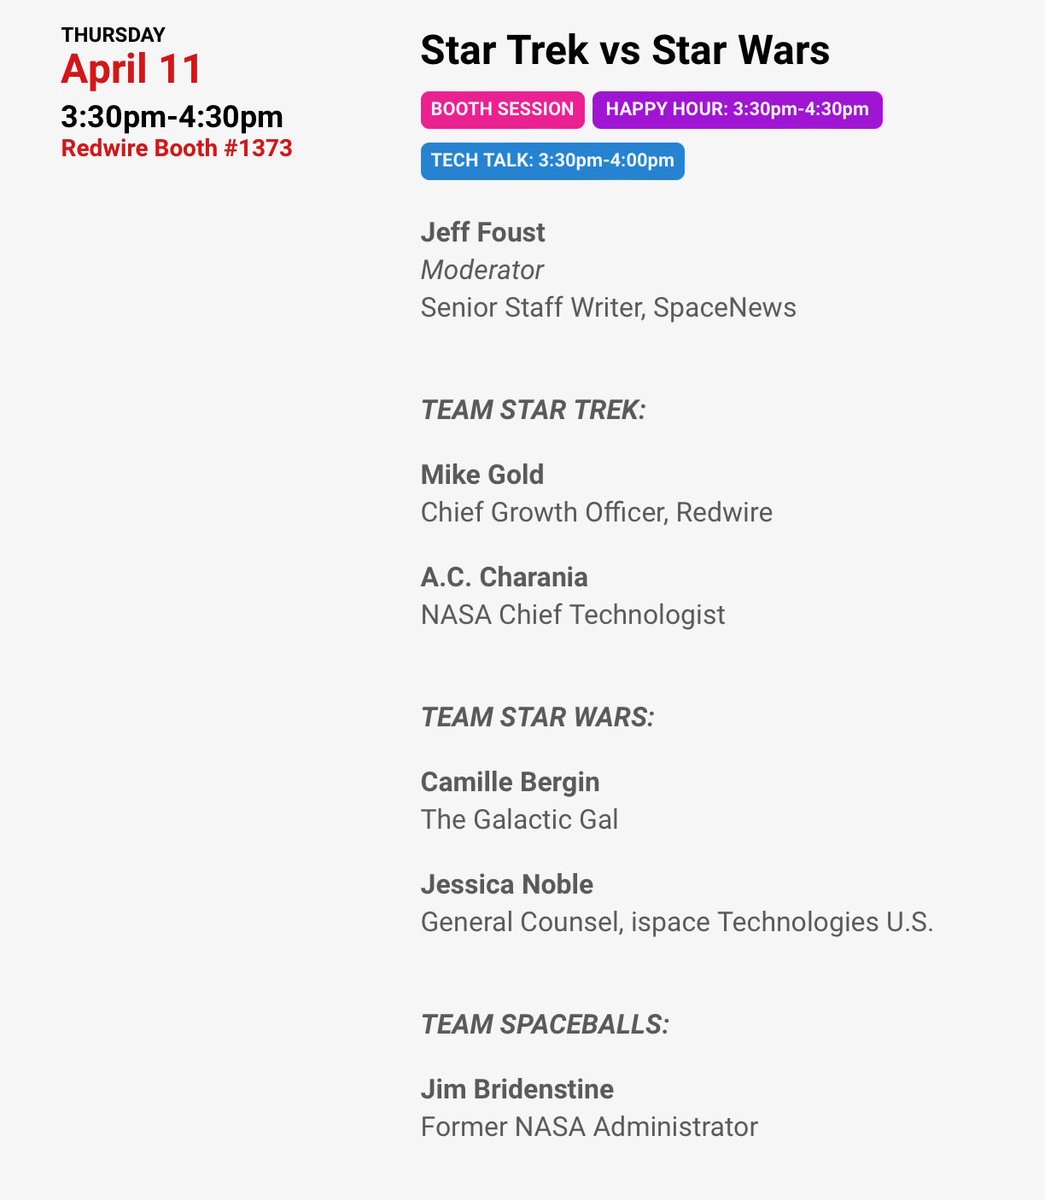 The fact that Team Spaceballs is included (and well represented by a very able communicator) makes this a must-see debate at the end of Space Symposium.